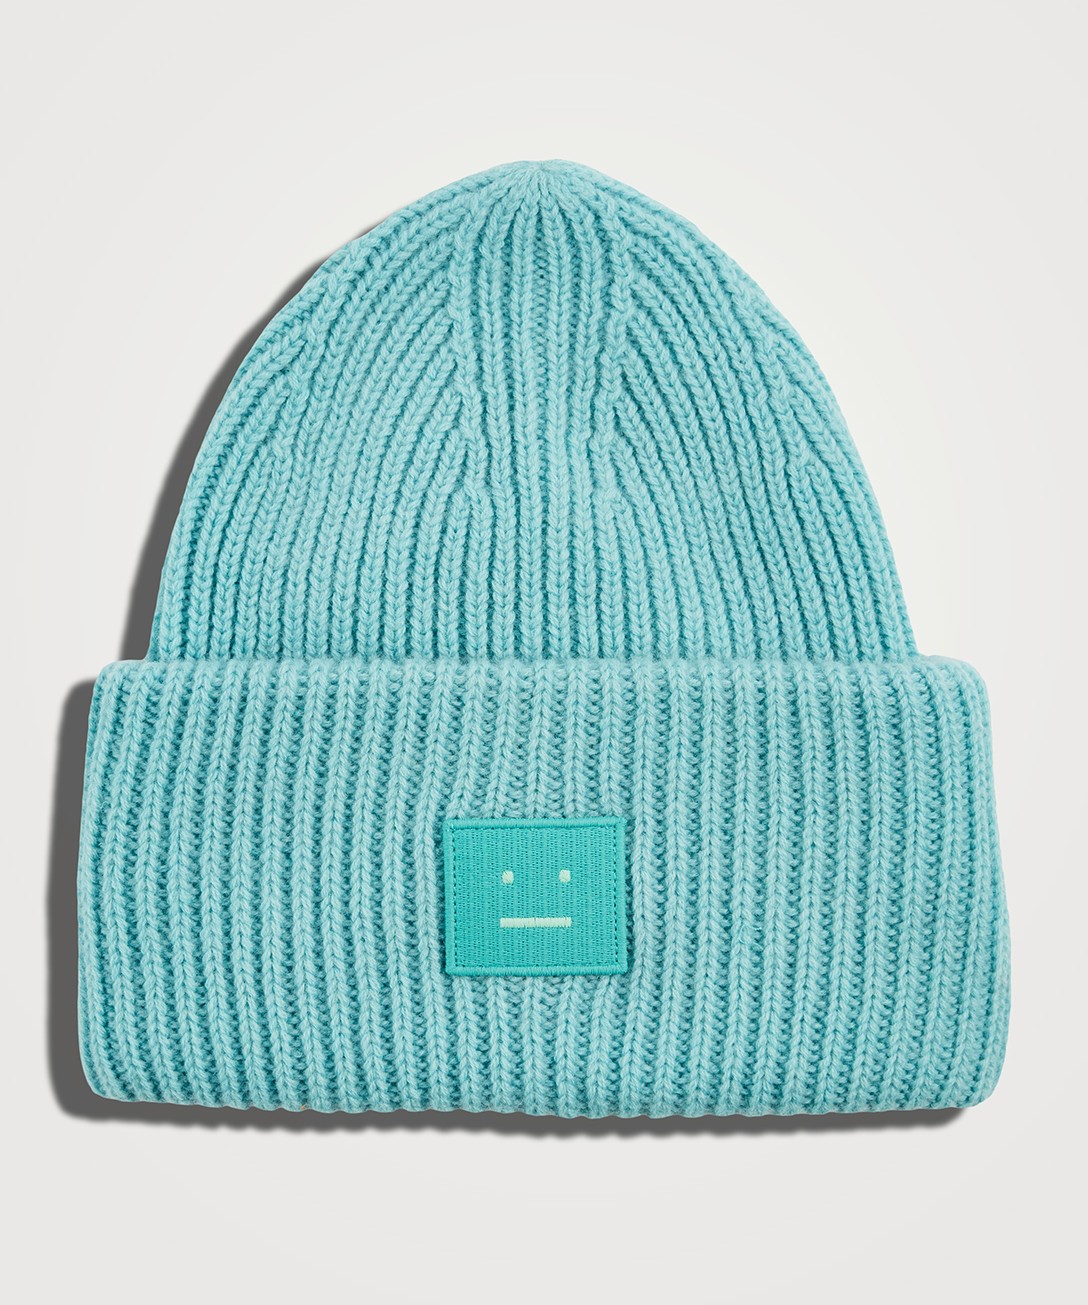 Image of a ribbed Acne Studios teal toque with the Acne Studios logo on the cuff.